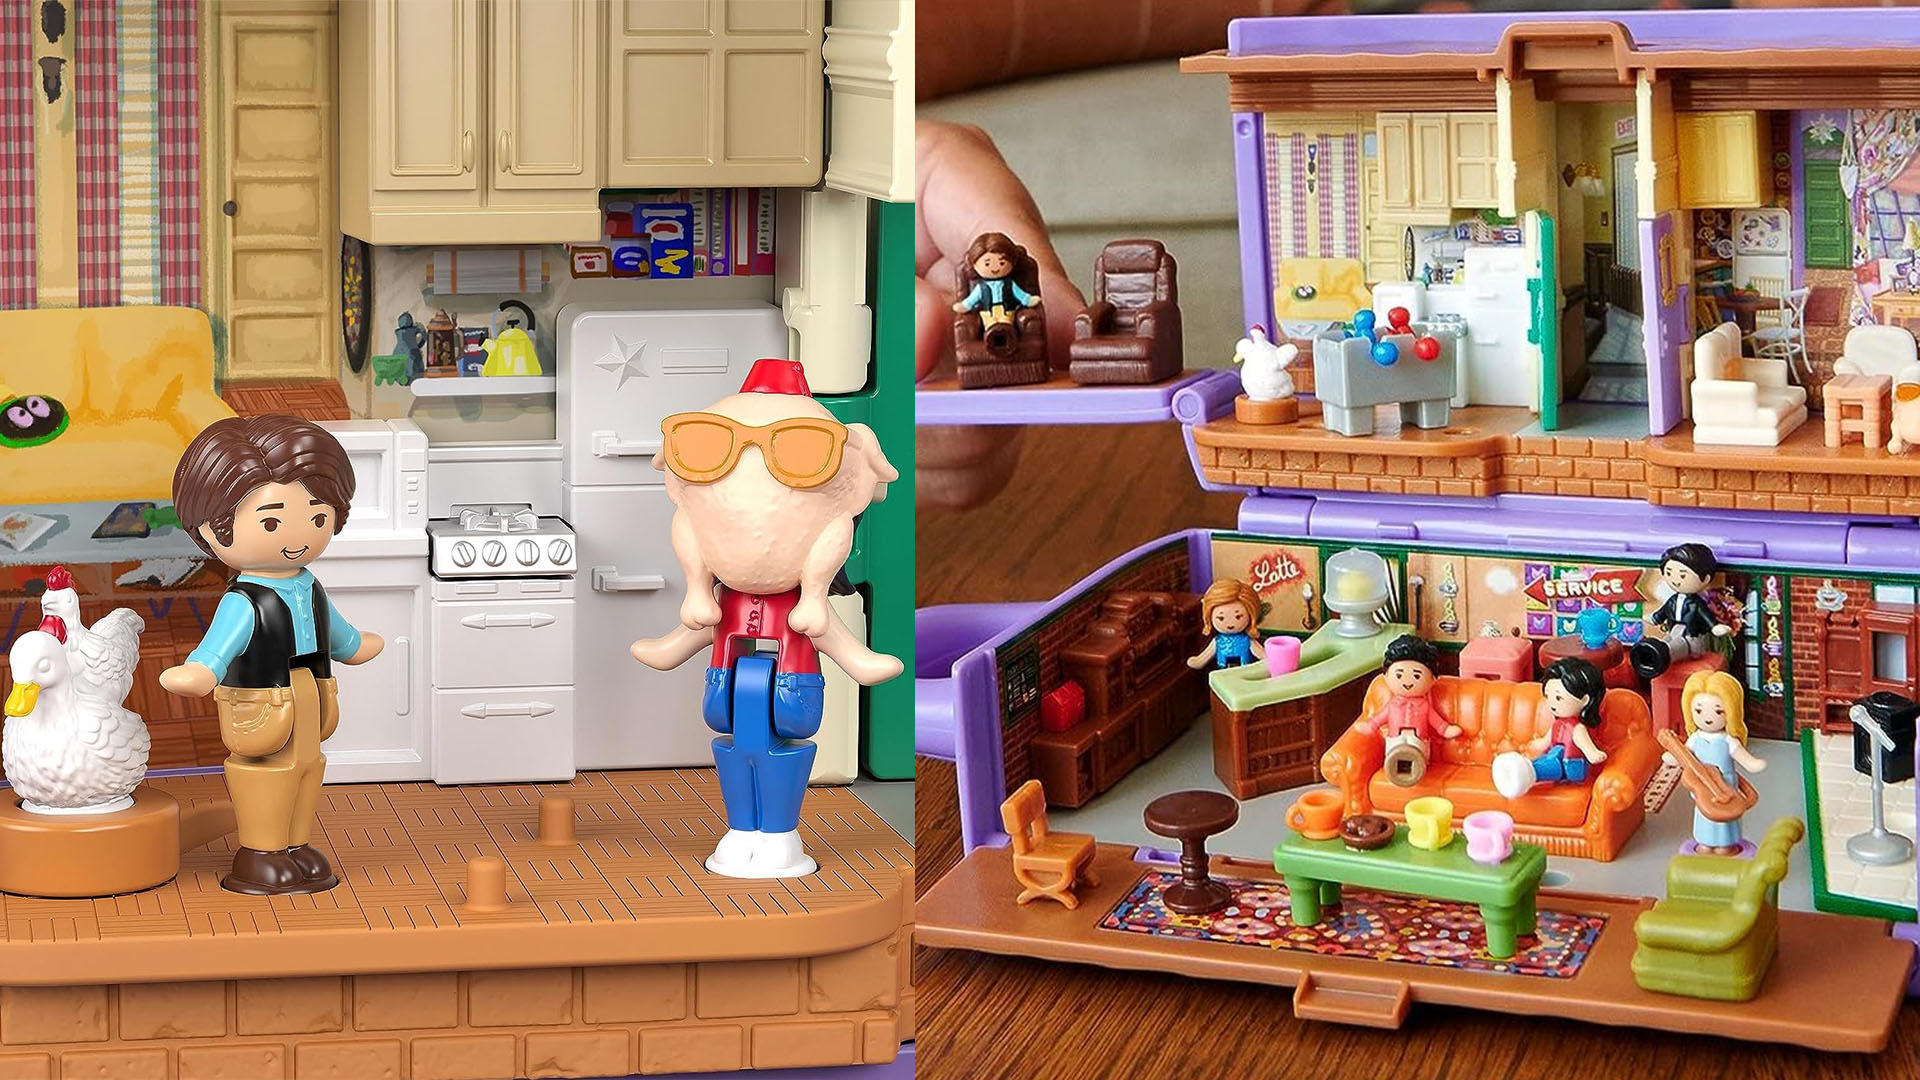 FRIENDS POLLY POCKET, First look and thoughts